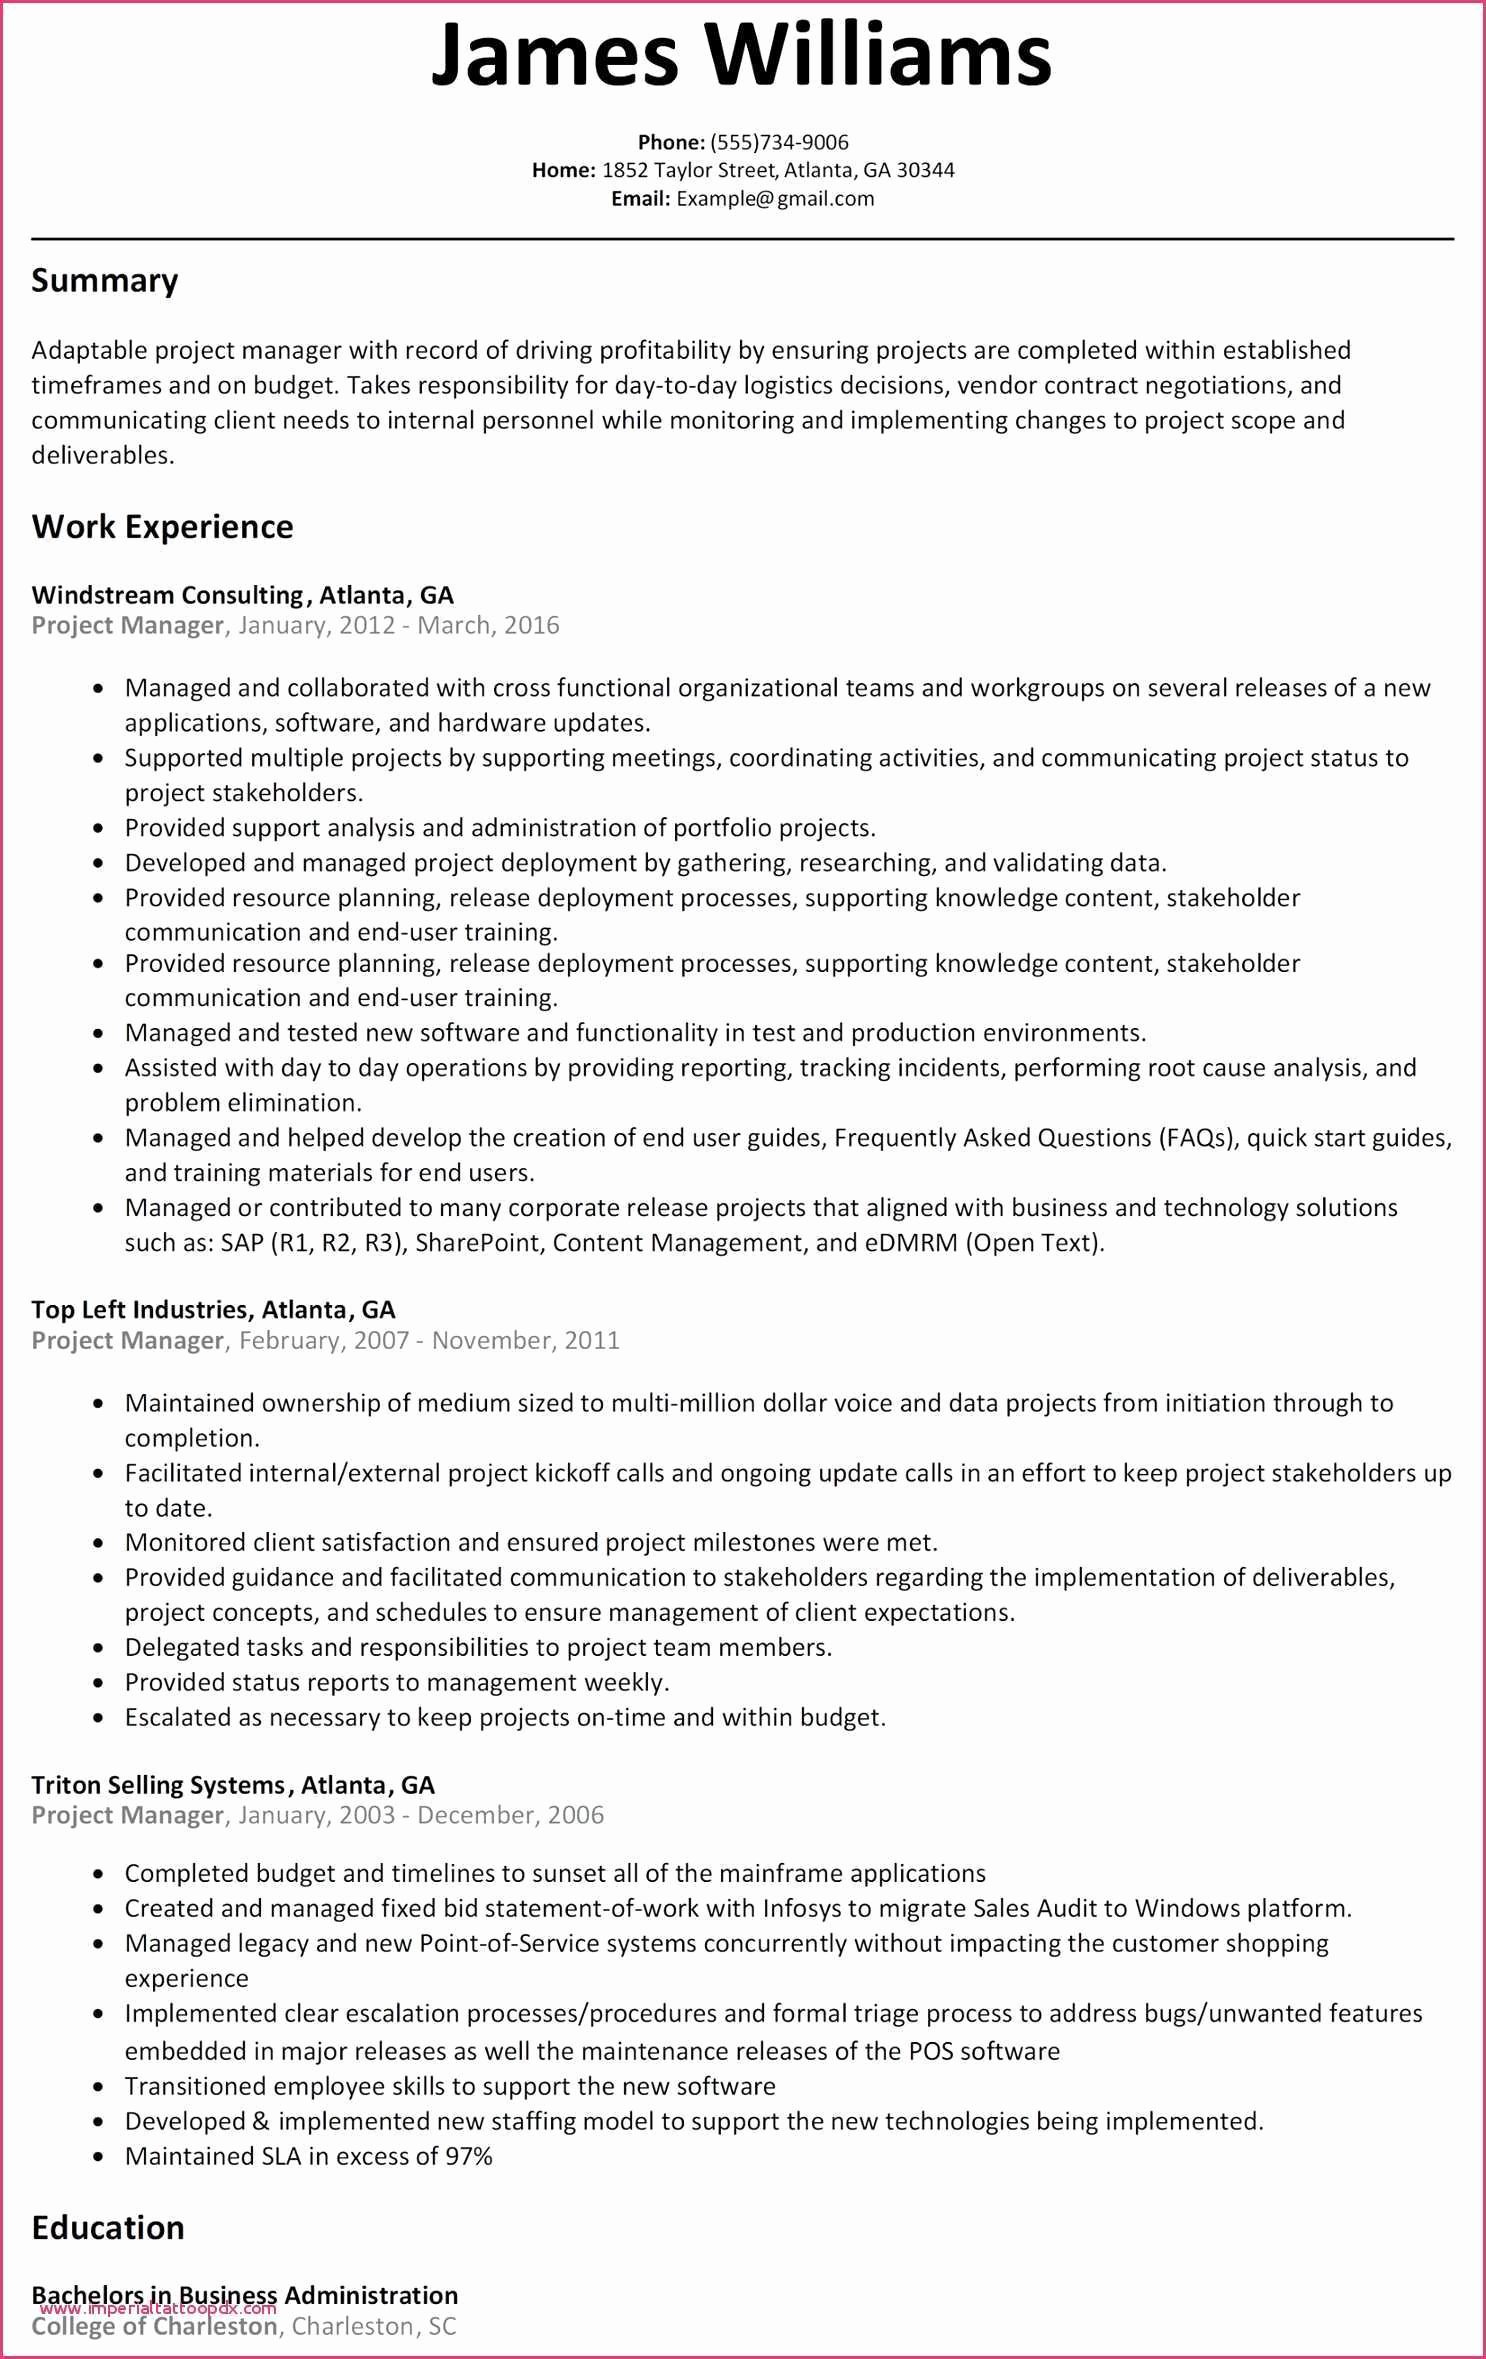 Resume Sample for Infrastructure Project Manager 33 Best